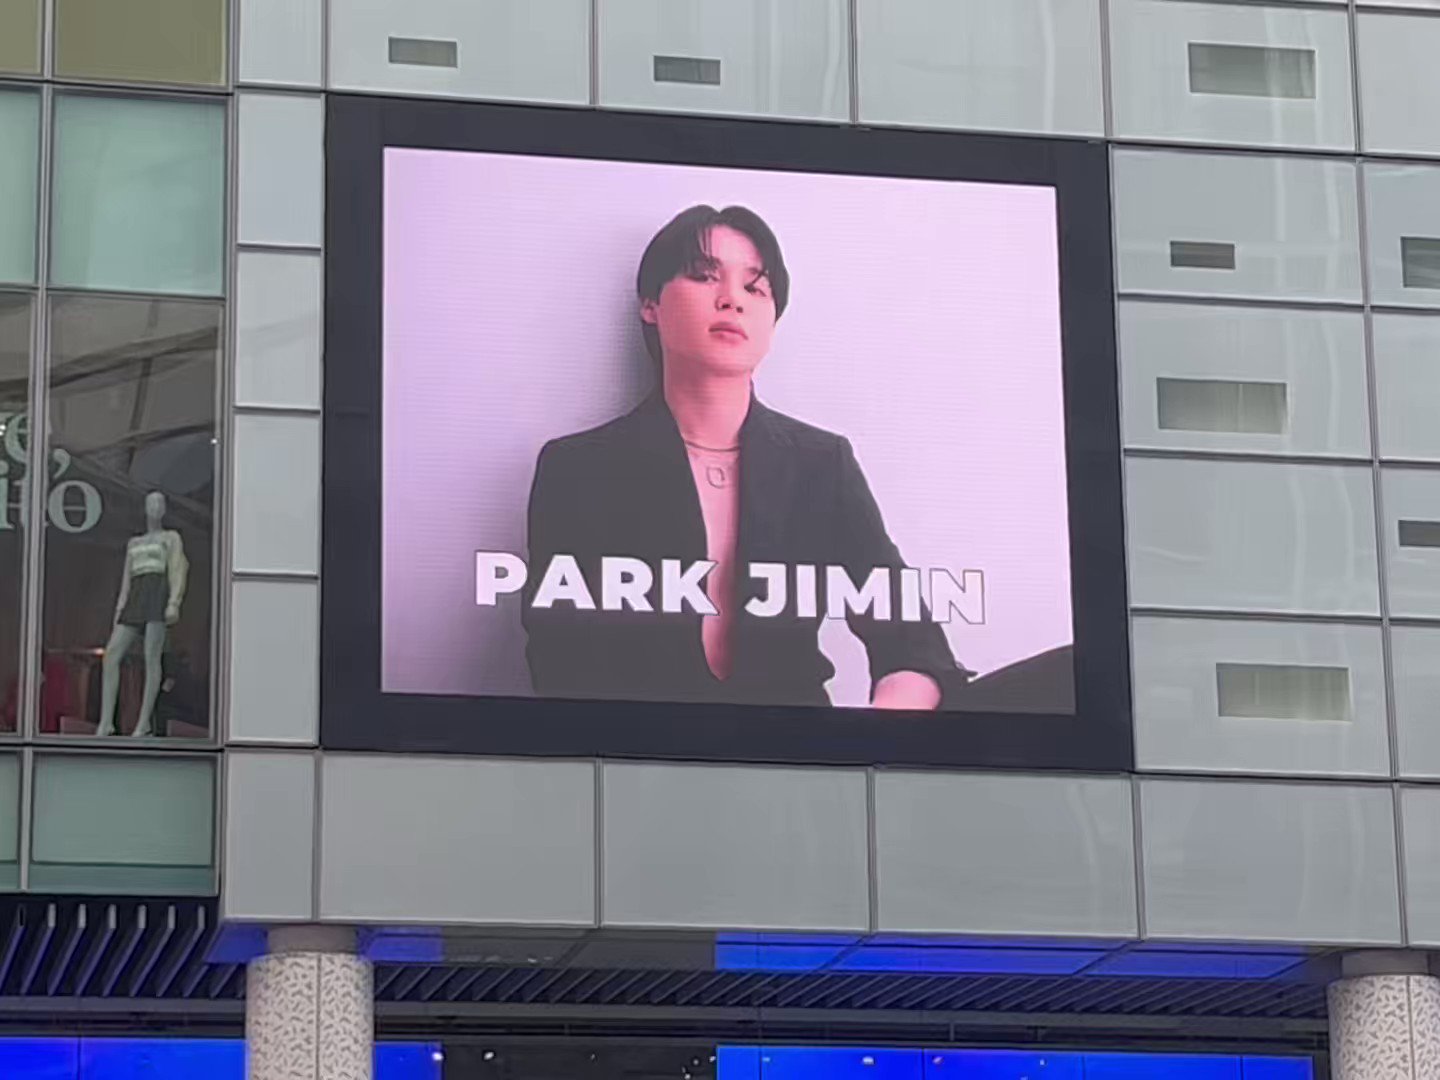 ✮DawnieJiminie✮ on X: JIMIN's BIRTHDAY VIDEO at SINGAPORE 313 Somerset  Screens Location: 💎Exterior Building facade facing Orchard Road 💎L1  facade wall, mall entrance next to Somerset station exit 💎L1 parapet  f